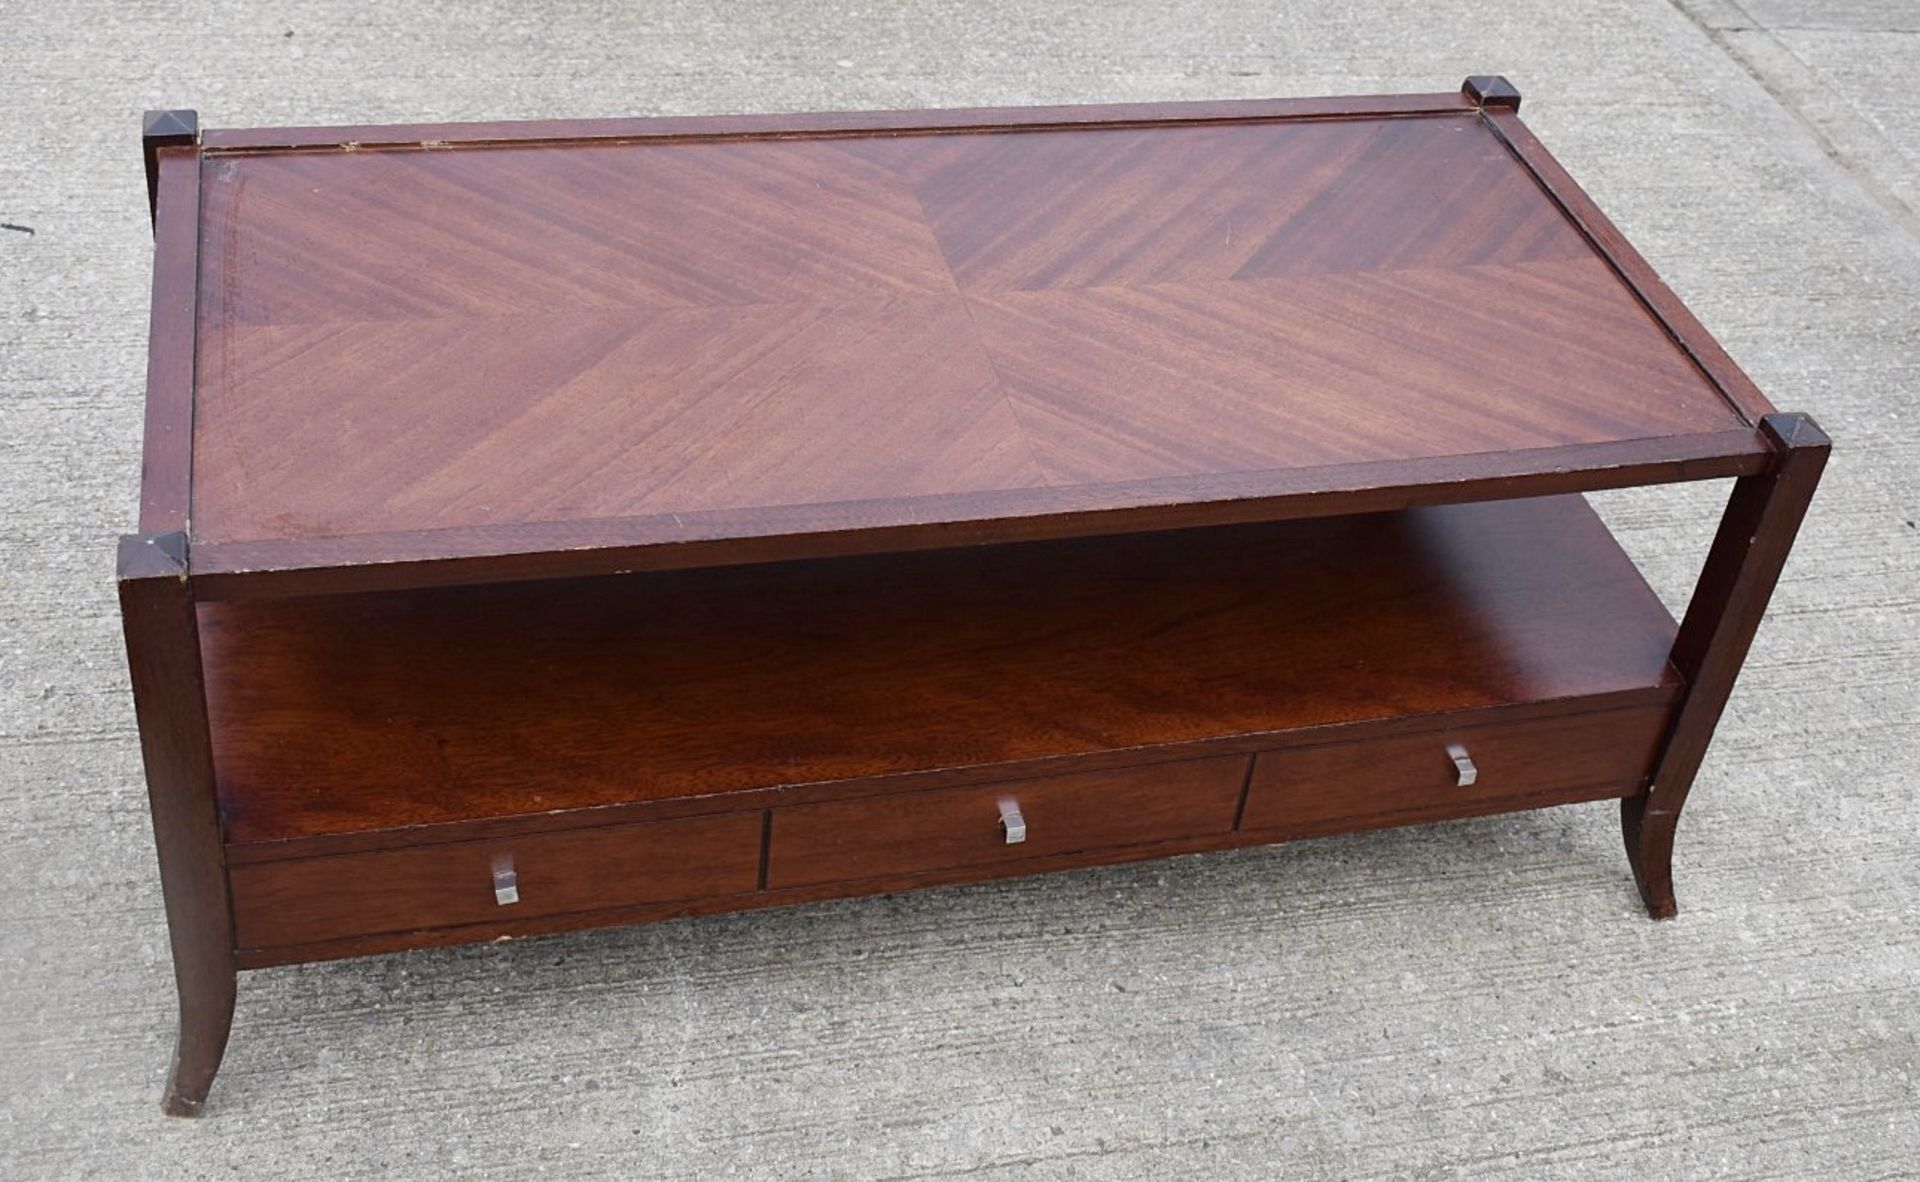 1 x Elegant Handcrafted Solid Wood Coffee / Cocktail Table with False Drawer Frontage - Recently - Bild 2 aus 3